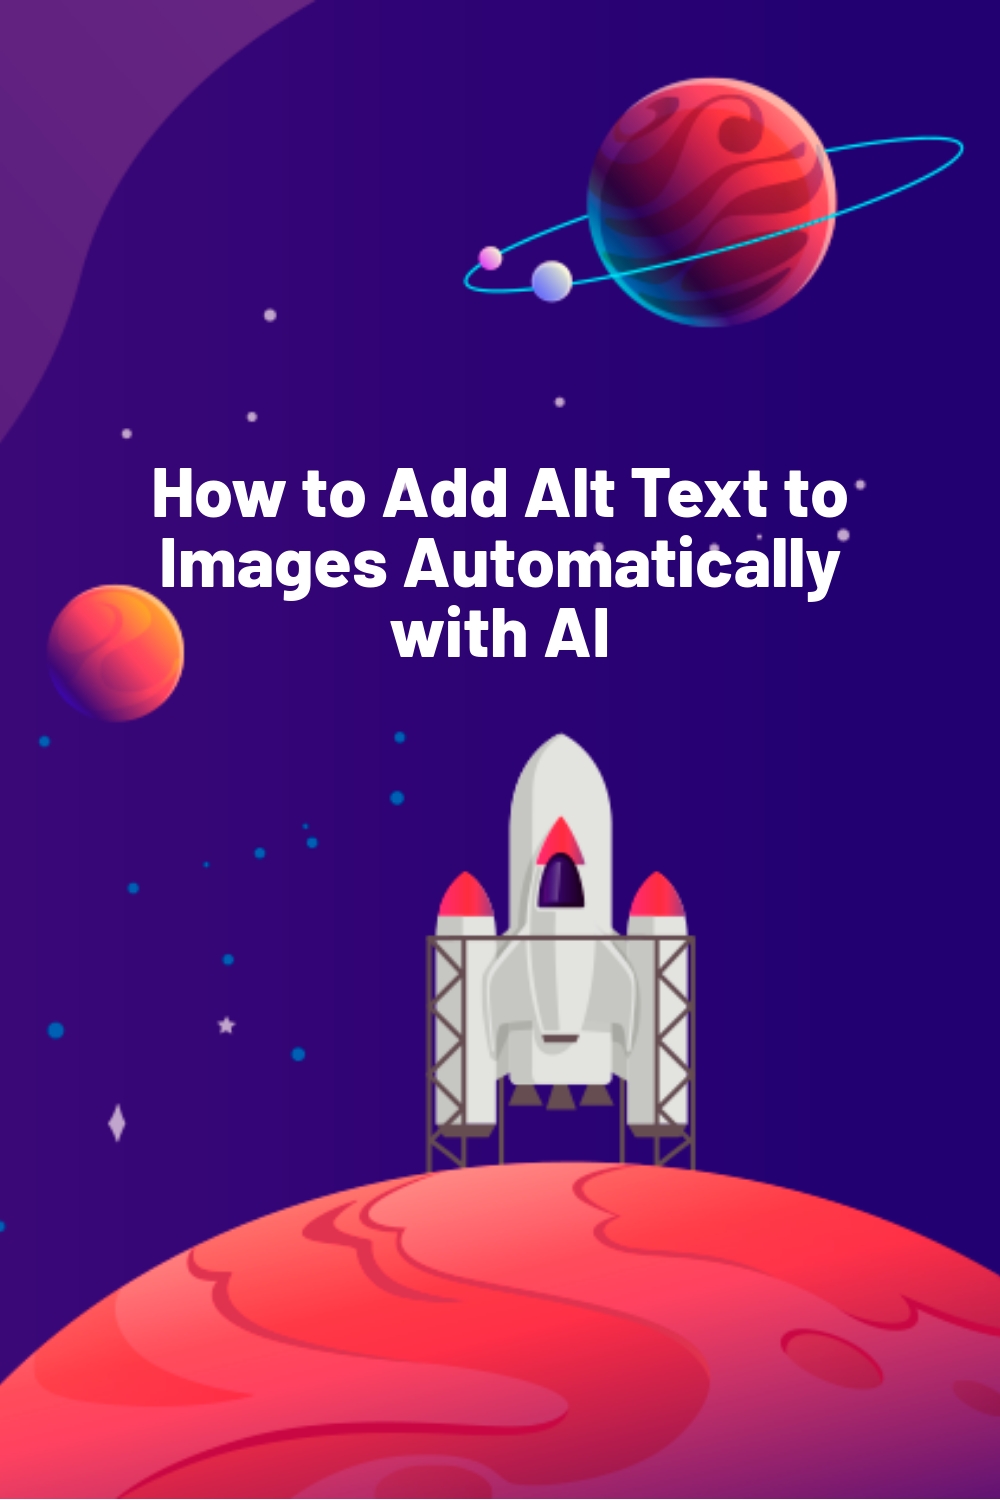 How to Add Alt Text to Images Automatically with AI